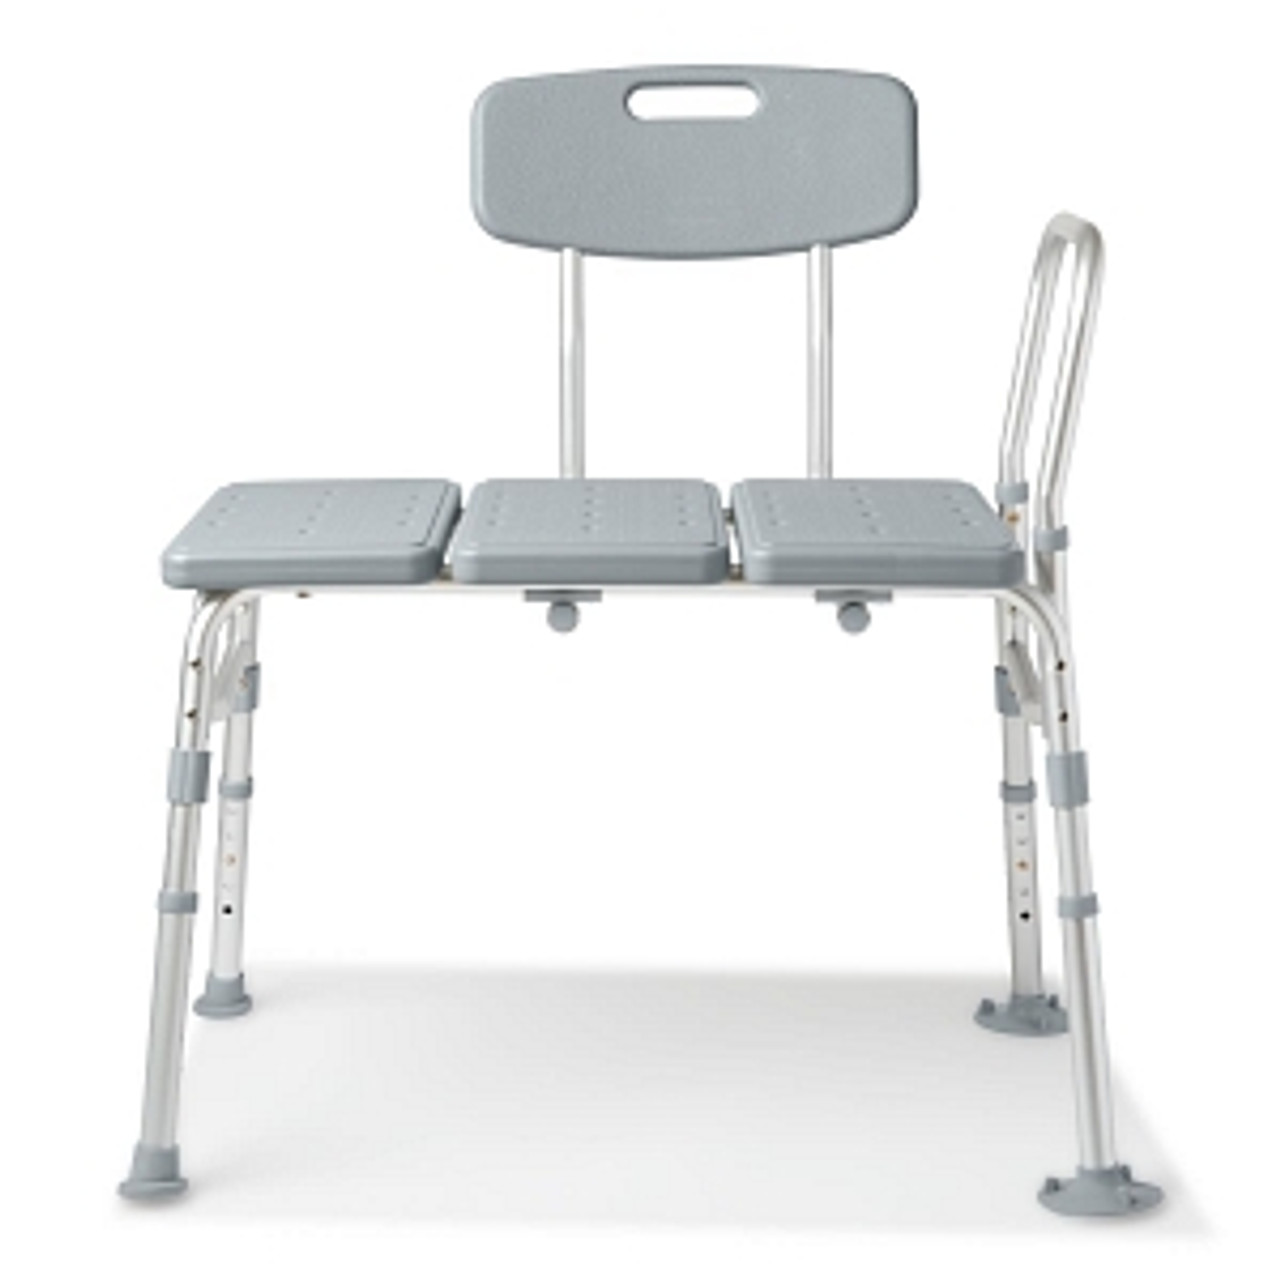 Comes with slip-resistant feet
Direction of the seat back can be reversed easily without tools
Side arm provides extra stability and leverage
Does not come in retail packaging